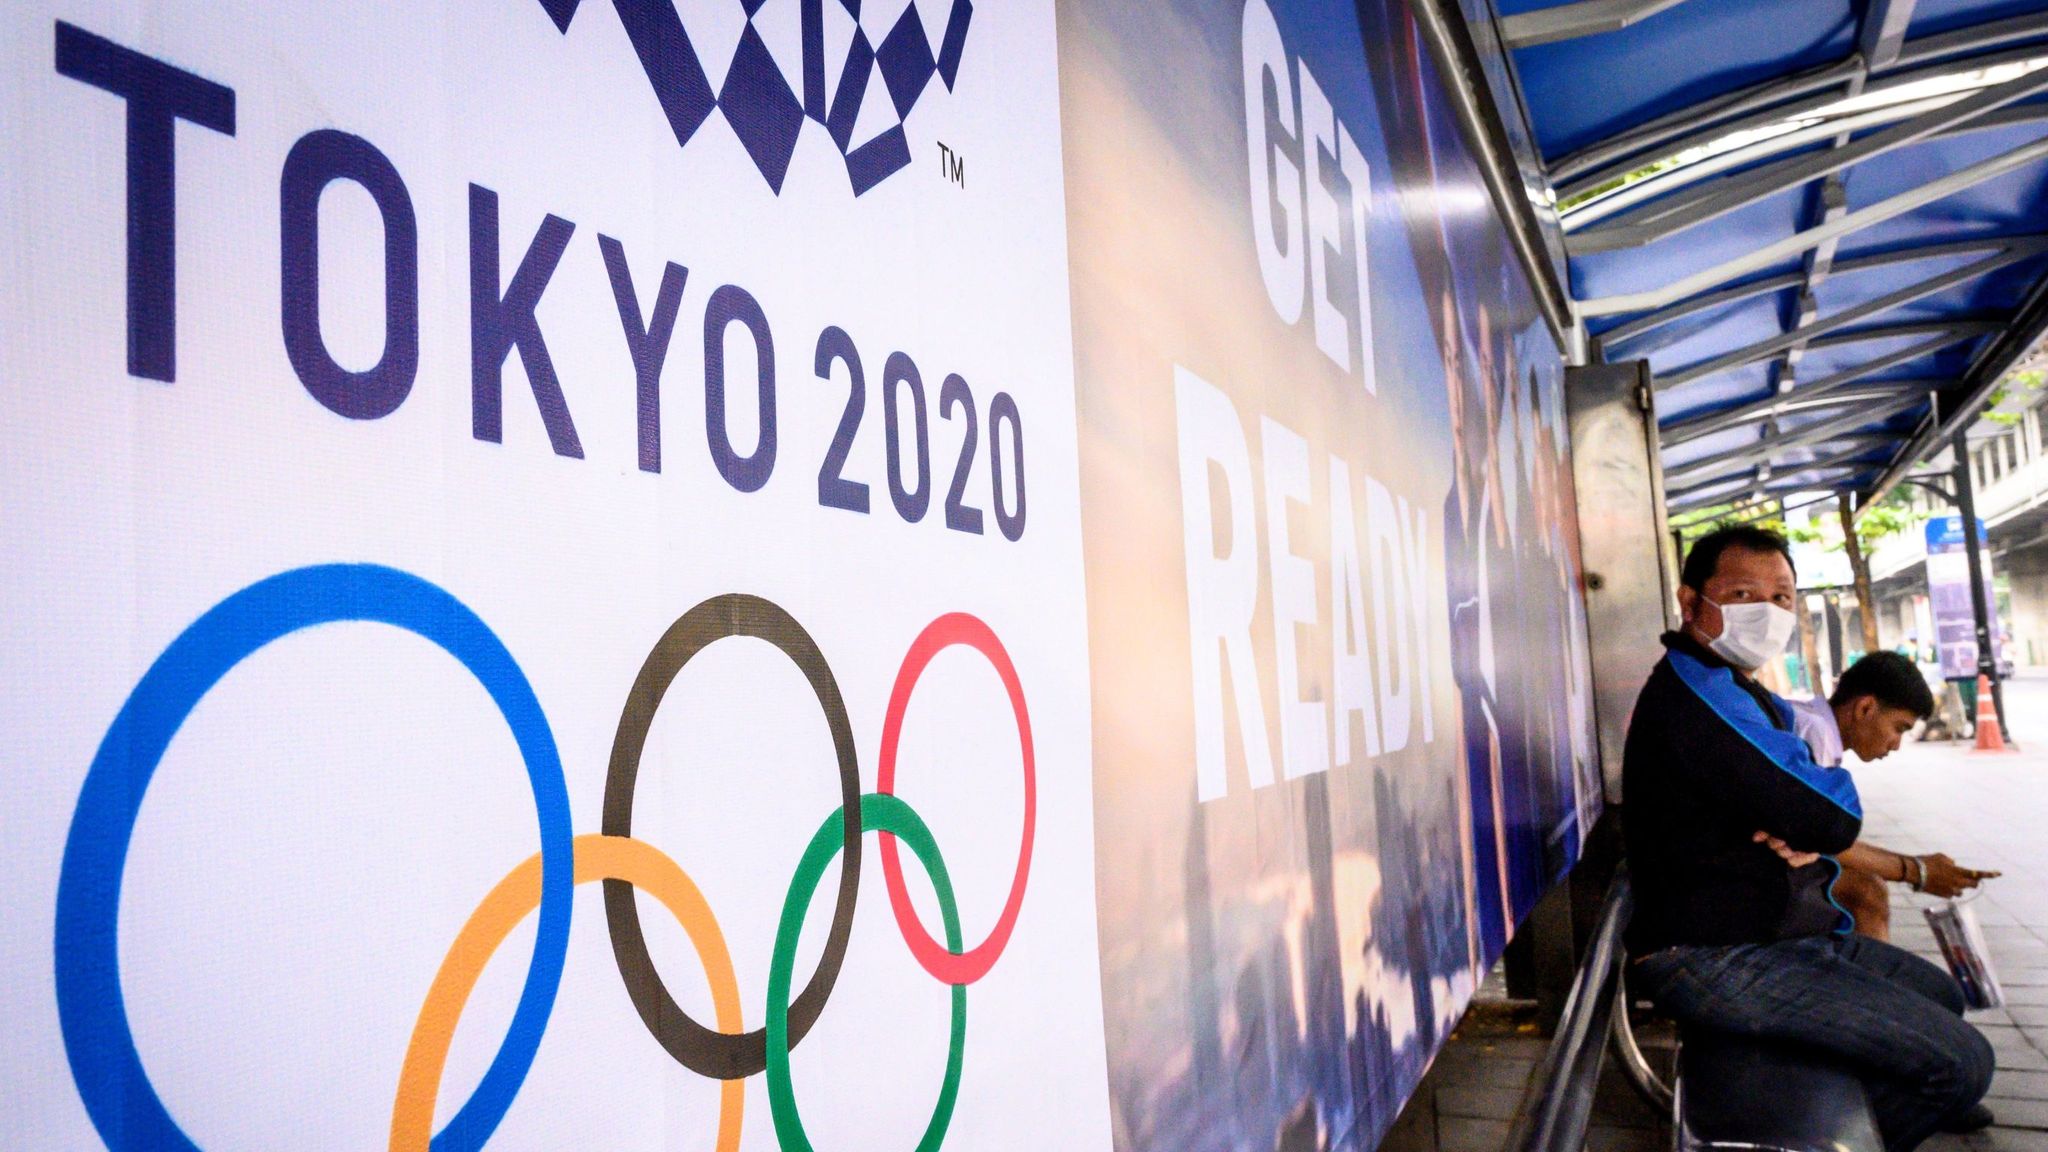 Tokyo 2020: Olympic Games to start on July 2021